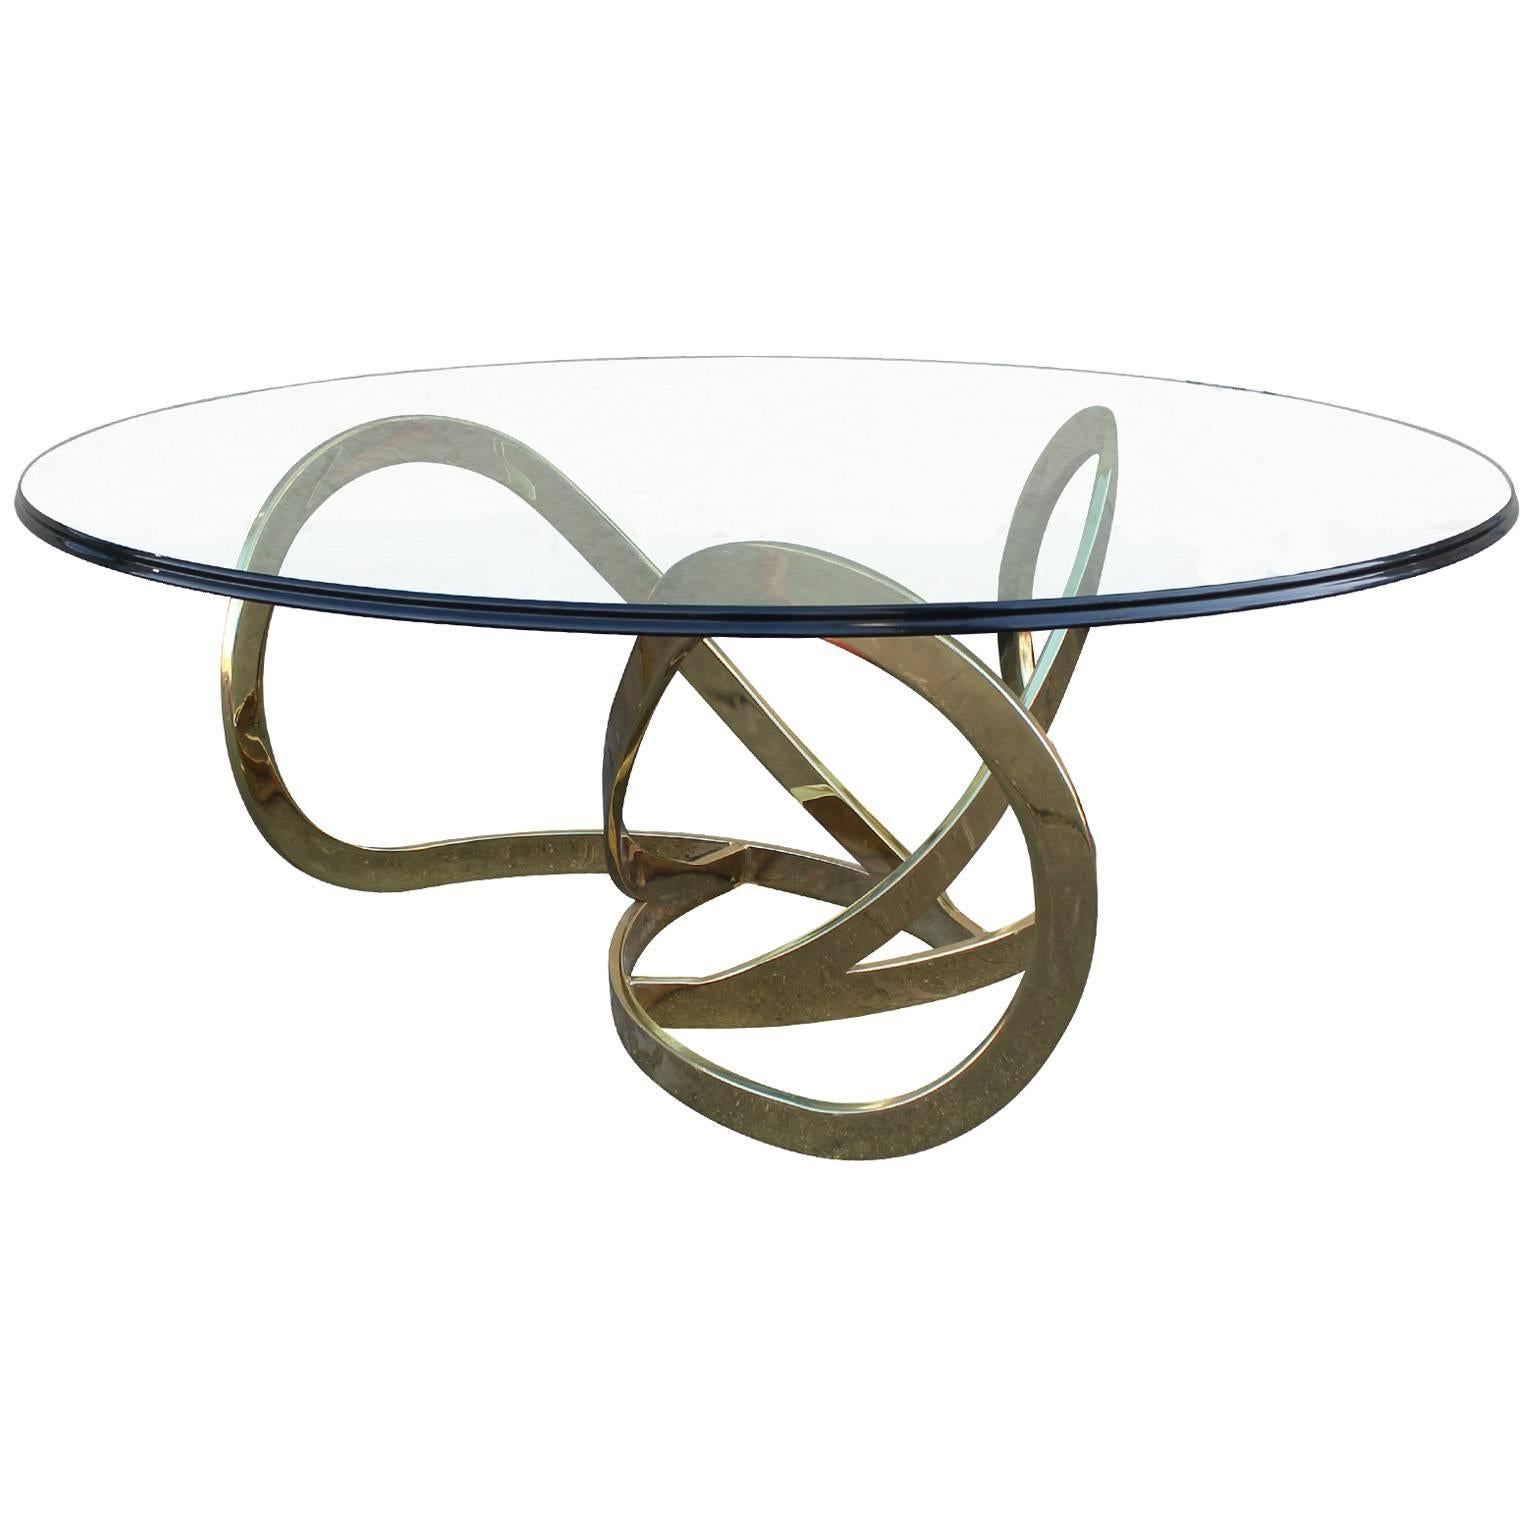 Glamorous round coffee table in the style of Milo Baughman. Thick cut-glass top rests upon a shiny brass base.